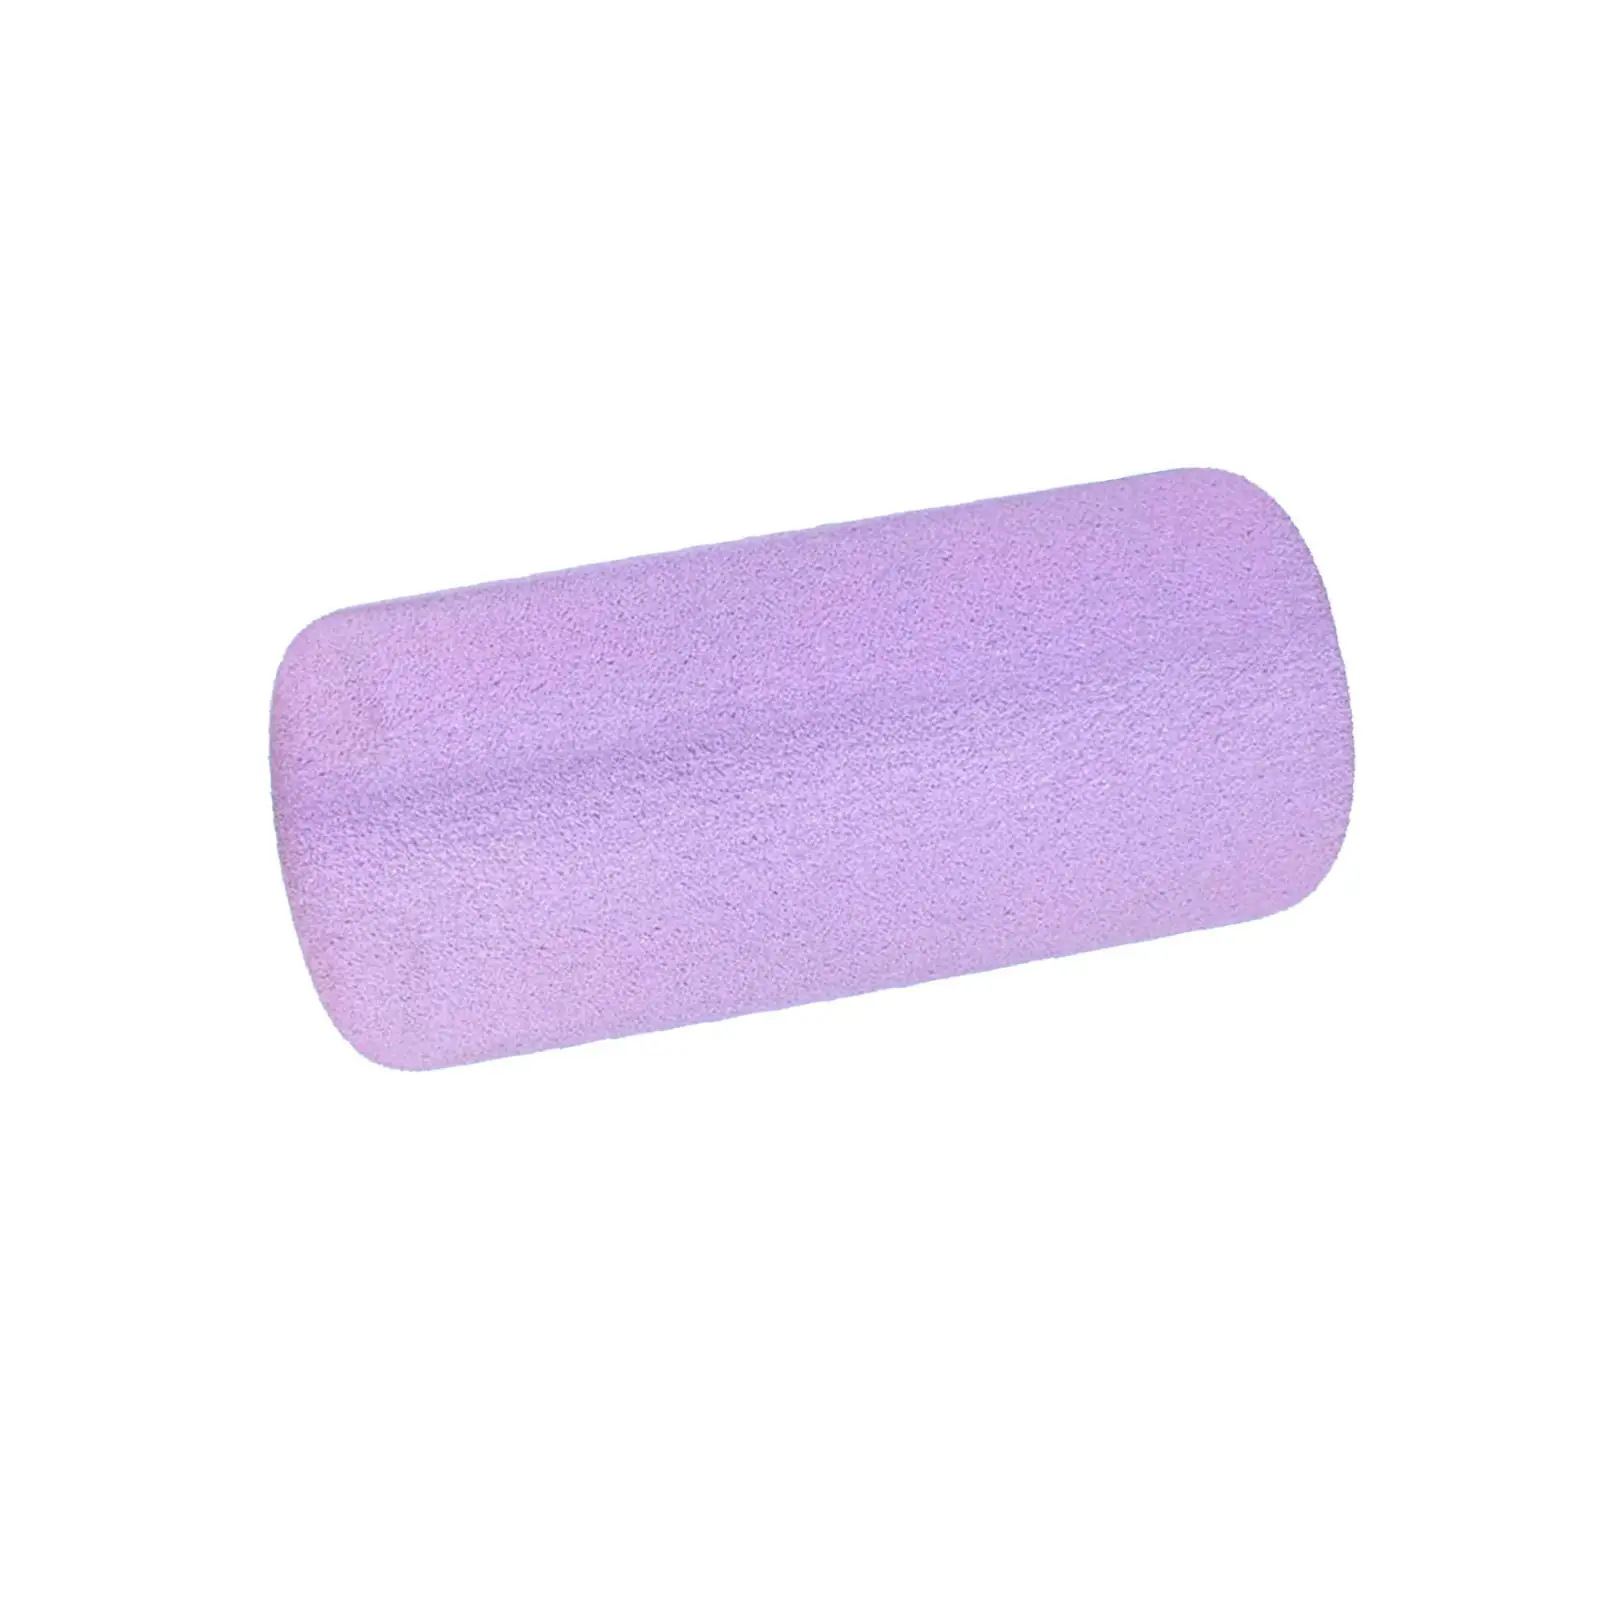 Foam Foot Pads Rollers Sponge Sleeve for Strength Training Weight Bench Exercise Machines Fitness Equipments Abdominal Trainer